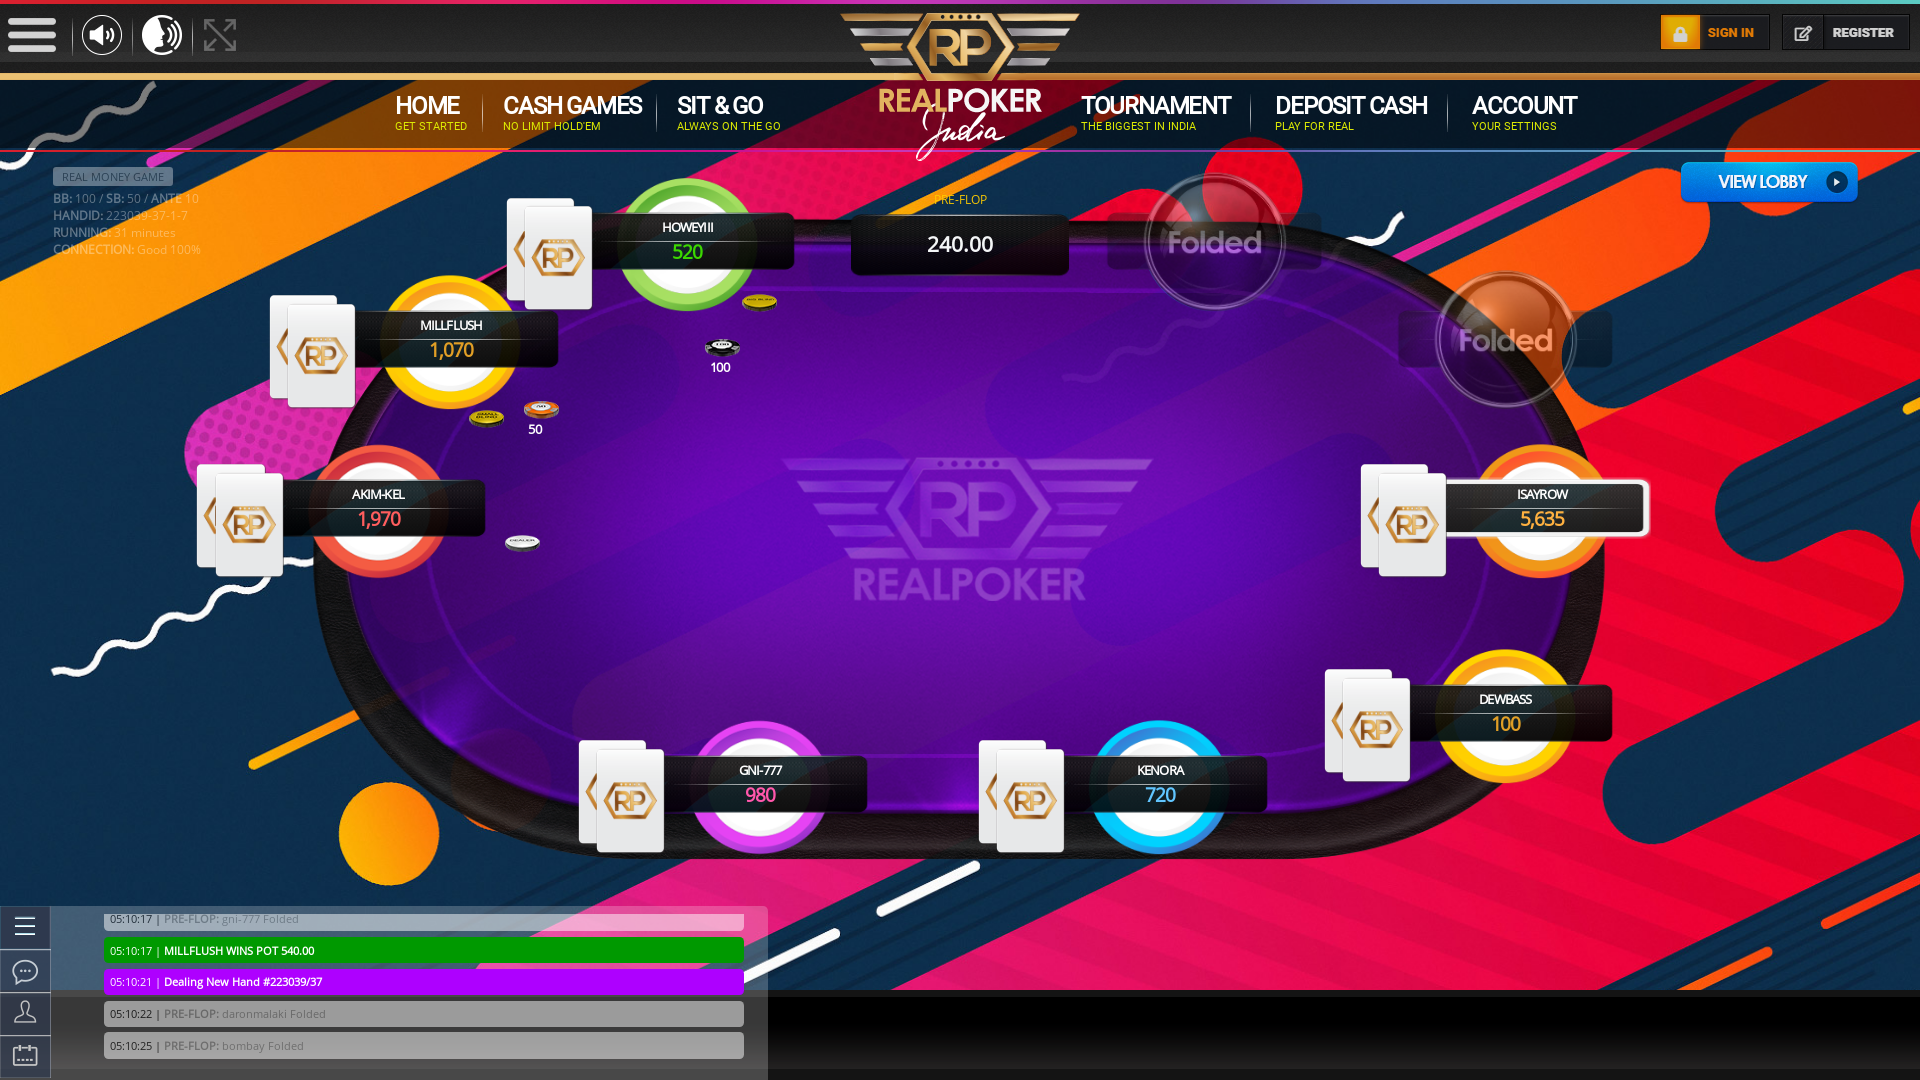 Indian online poker on a 10 player table in the 31st minute match up